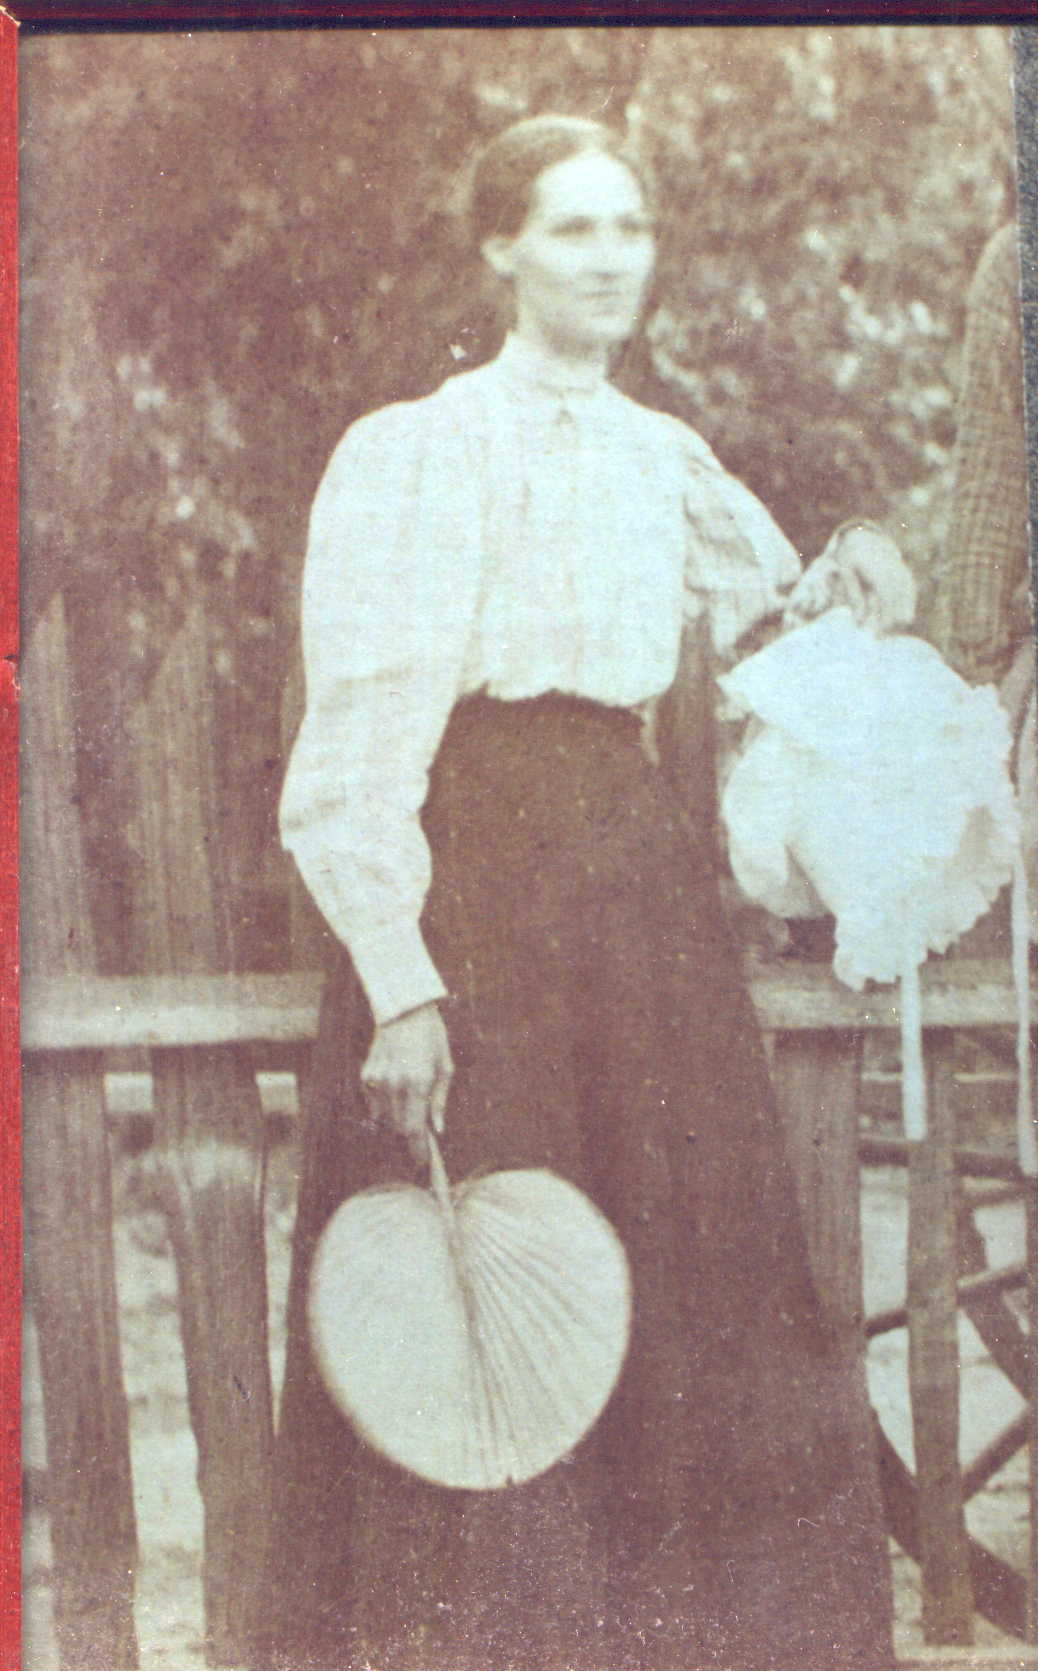 Edna Earl Blunt, my great-grandmother from Tishomingo, Mississippi.